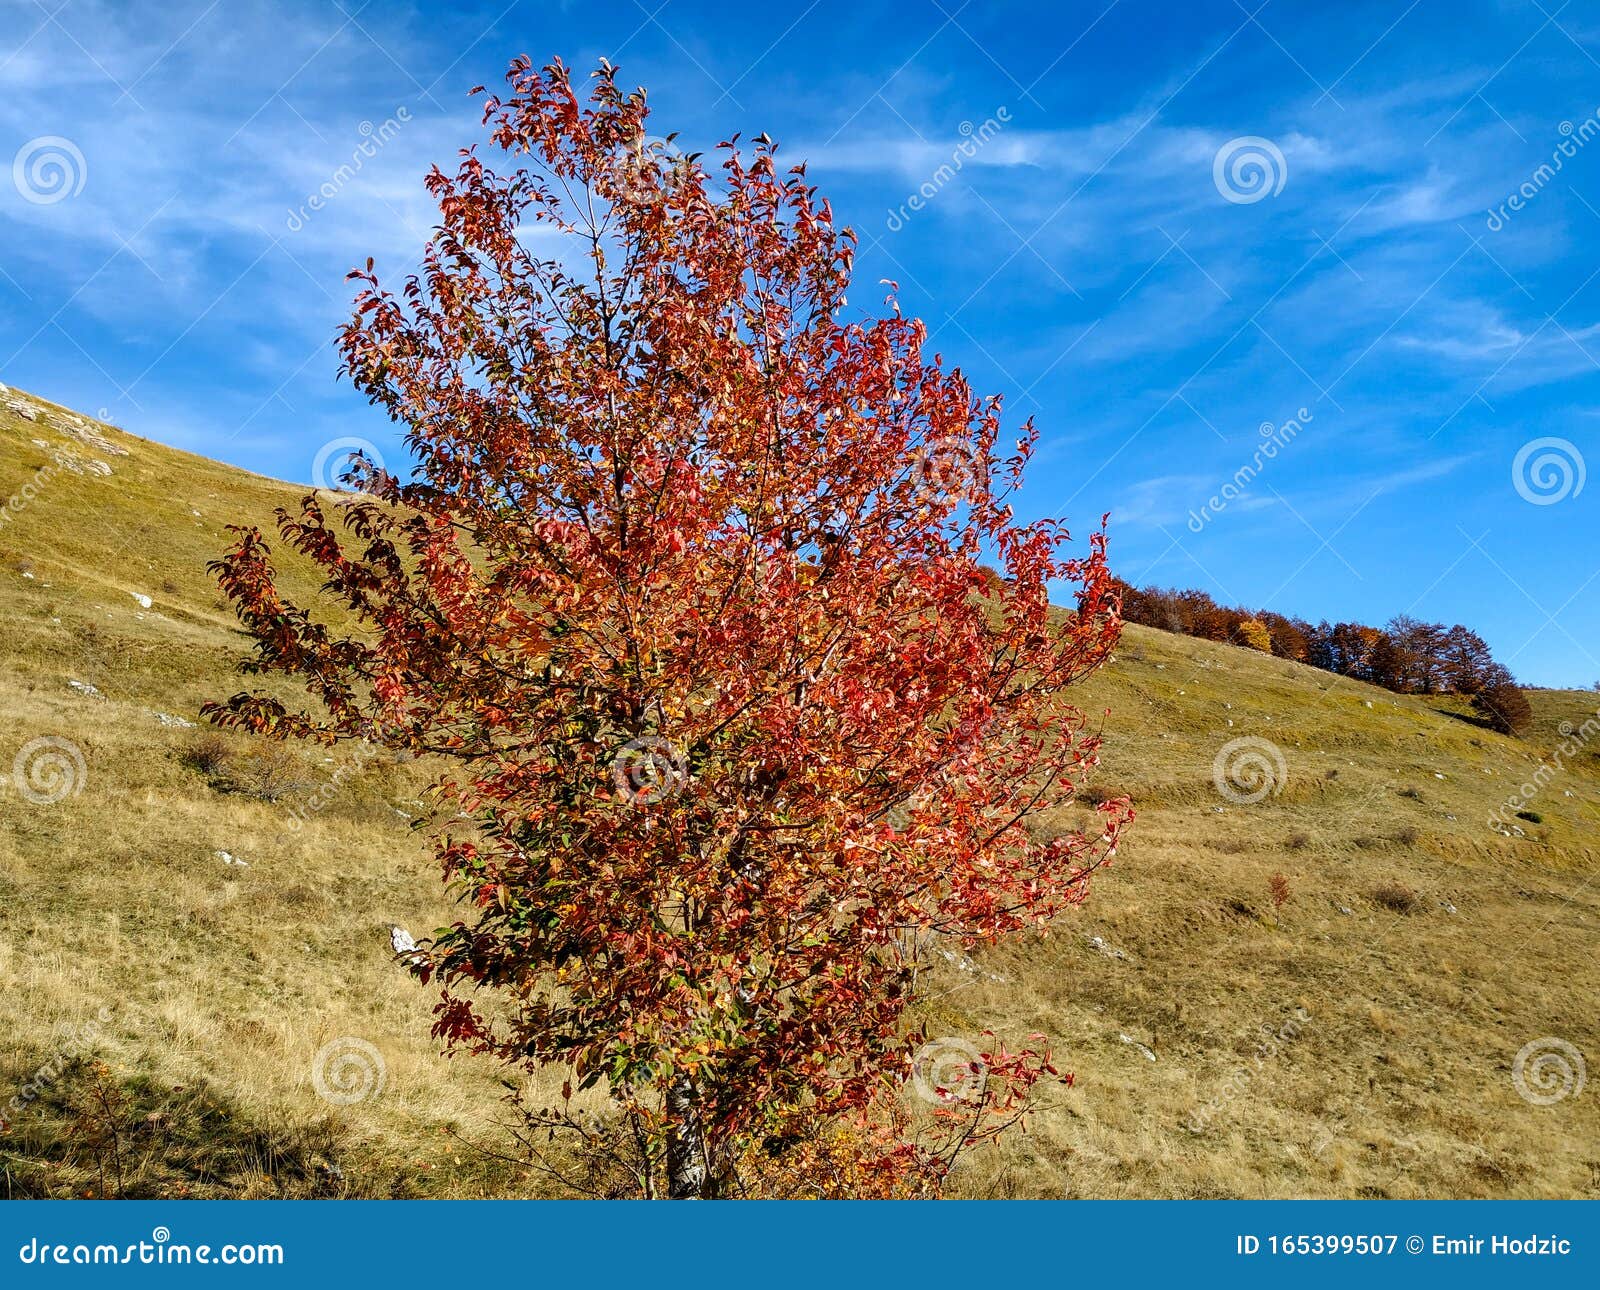 Colorful Isolate Lone Tree On A Green Grass Hill During Beautiful Blue